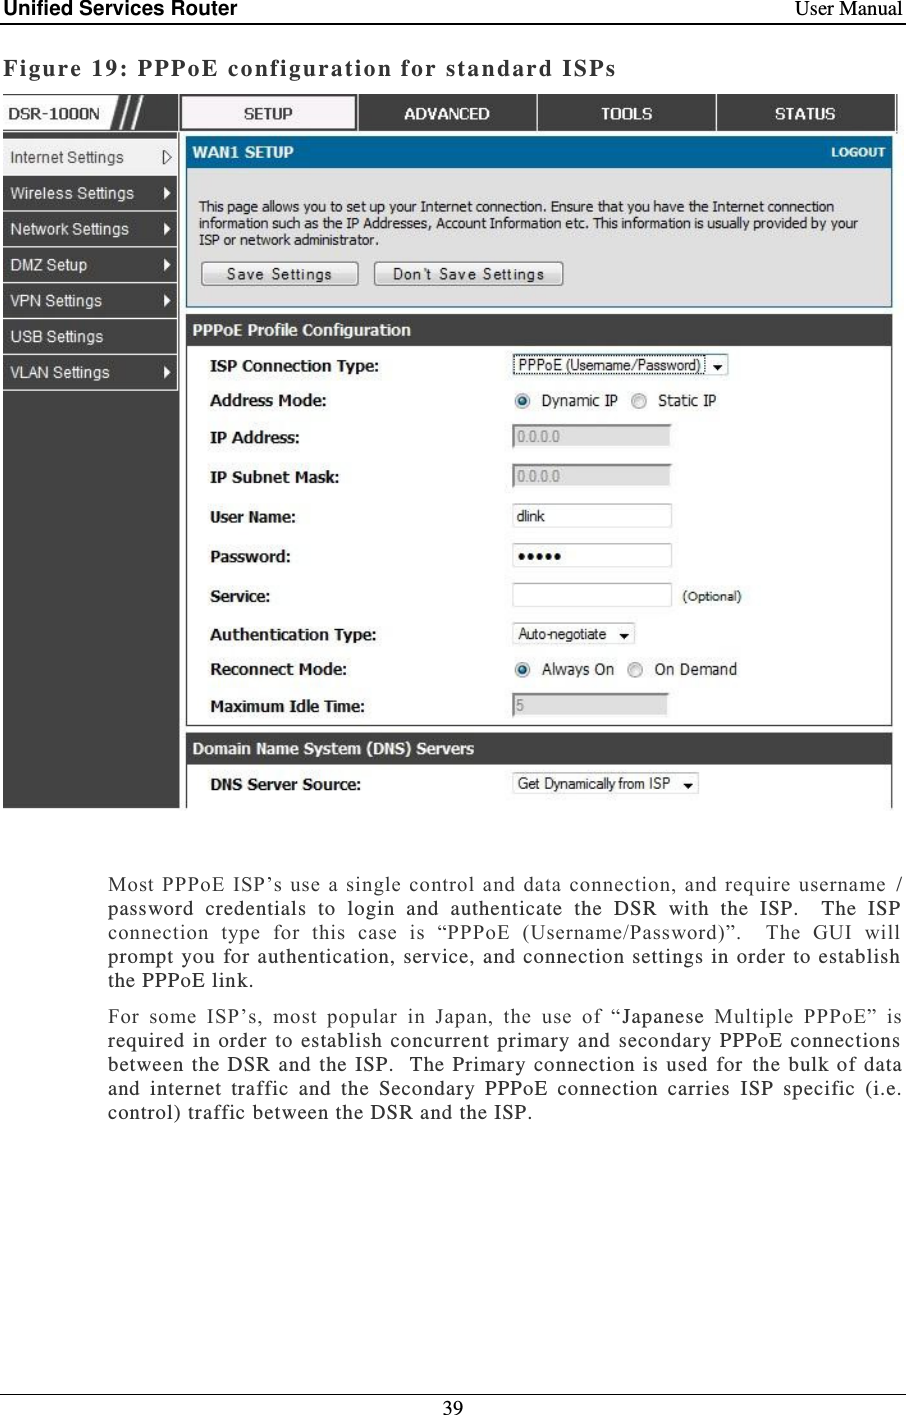 Unified Services Router    User Manual 39  Figure 19: PPPoE co nfiguration f or sta ndard ISPs    Most PPPoE ISP’s use a  single control  and  data connection, and require username  / password  credentials  to  login  and  authenticate  the  DSR  with  the  ISP.    The  ISP connection  type  for  this  case  is  “PPPoE  (Username/Password)”.    The  GUI  will prompt  you for authentication, service,  and connection settings  in order to  establish the PPPoE link.   For  some  ISP’s,  most  popular  in  Japan,  the  use  of  “Japanese  Multiple  PPPoE”  is required  in  order  to establish concurrent primary  and  secondary PPPoE  connections between the DSR  and the  ISP.   The Primary connection  is  used  for  the bulk of data and  internet  traffic  and  the  Secondary  PPPoE  connection  carries  ISP  specific  (i.e. control) traffic between the DSR and the ISP.     